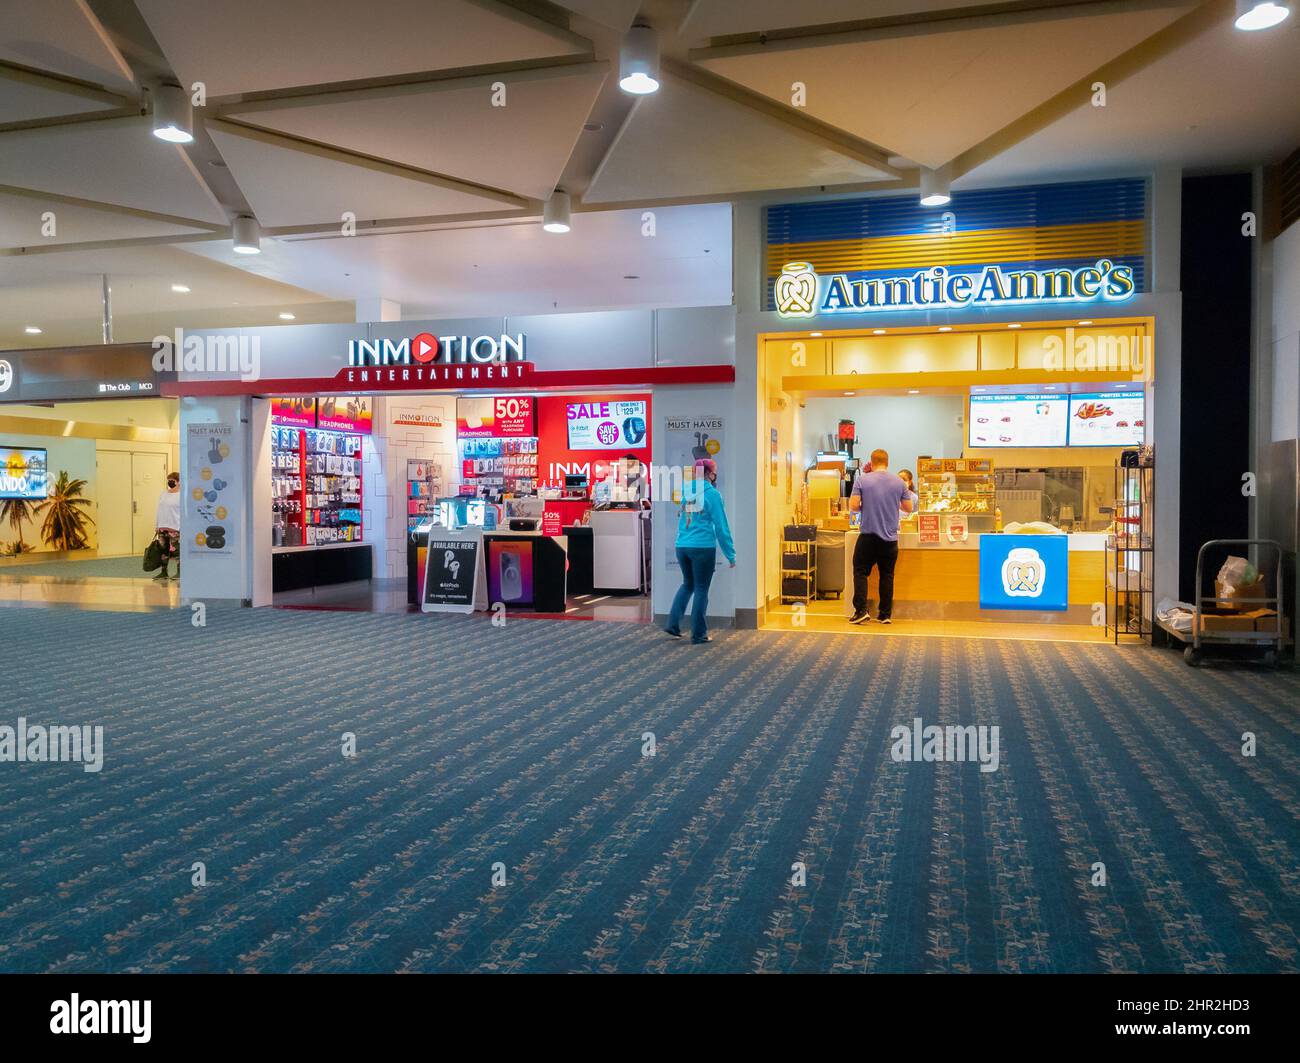 Orlando, Florida - February 4, 2022: Wide View of Auntie Anne's Shop and Inmotion Entertainment inside Terminal B of Orlando International Airport Stock Photo